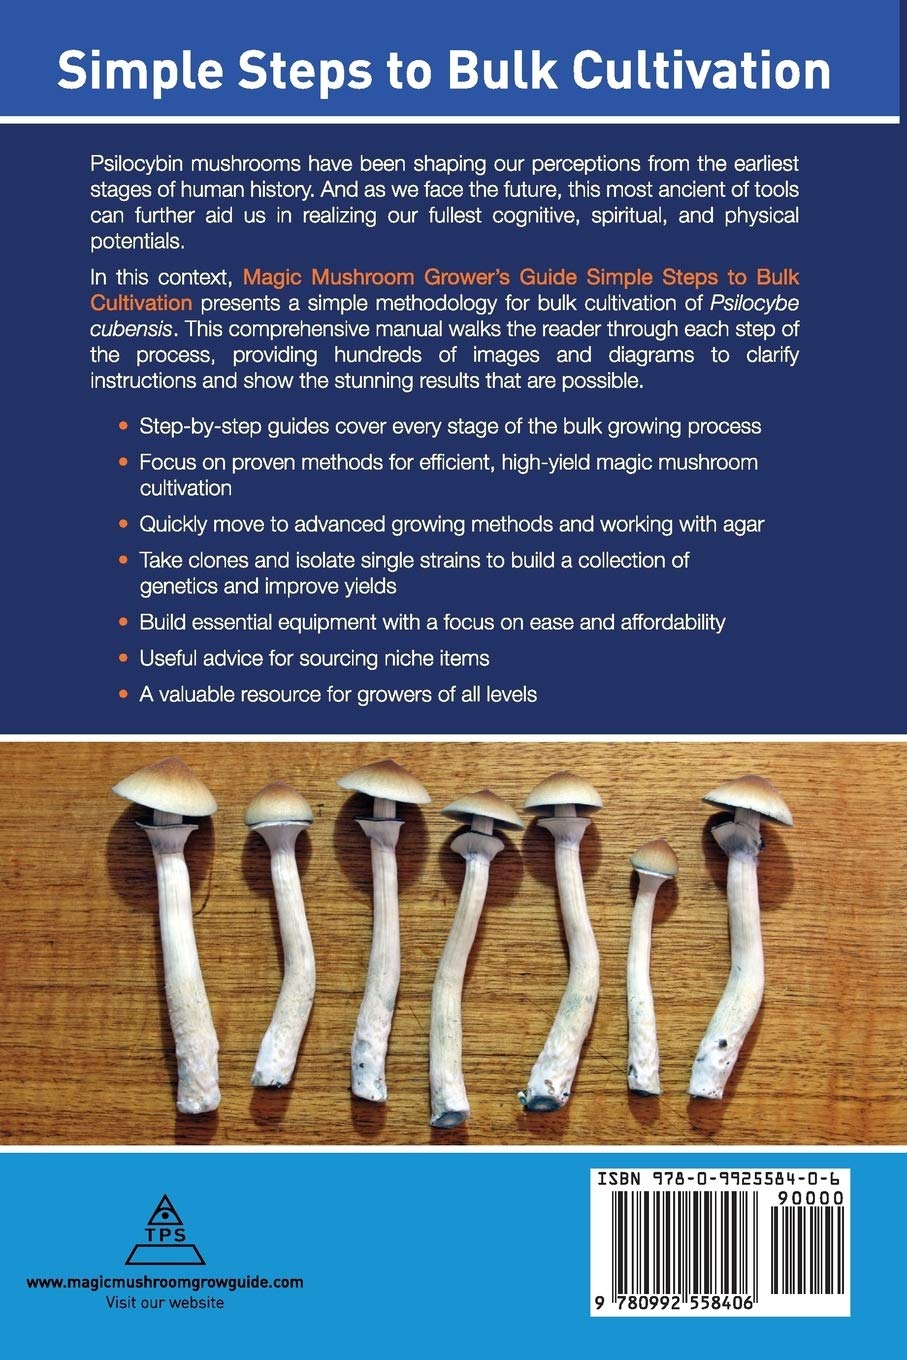 Magic Mushroom grower's Guide simple steps to bulk cultivation